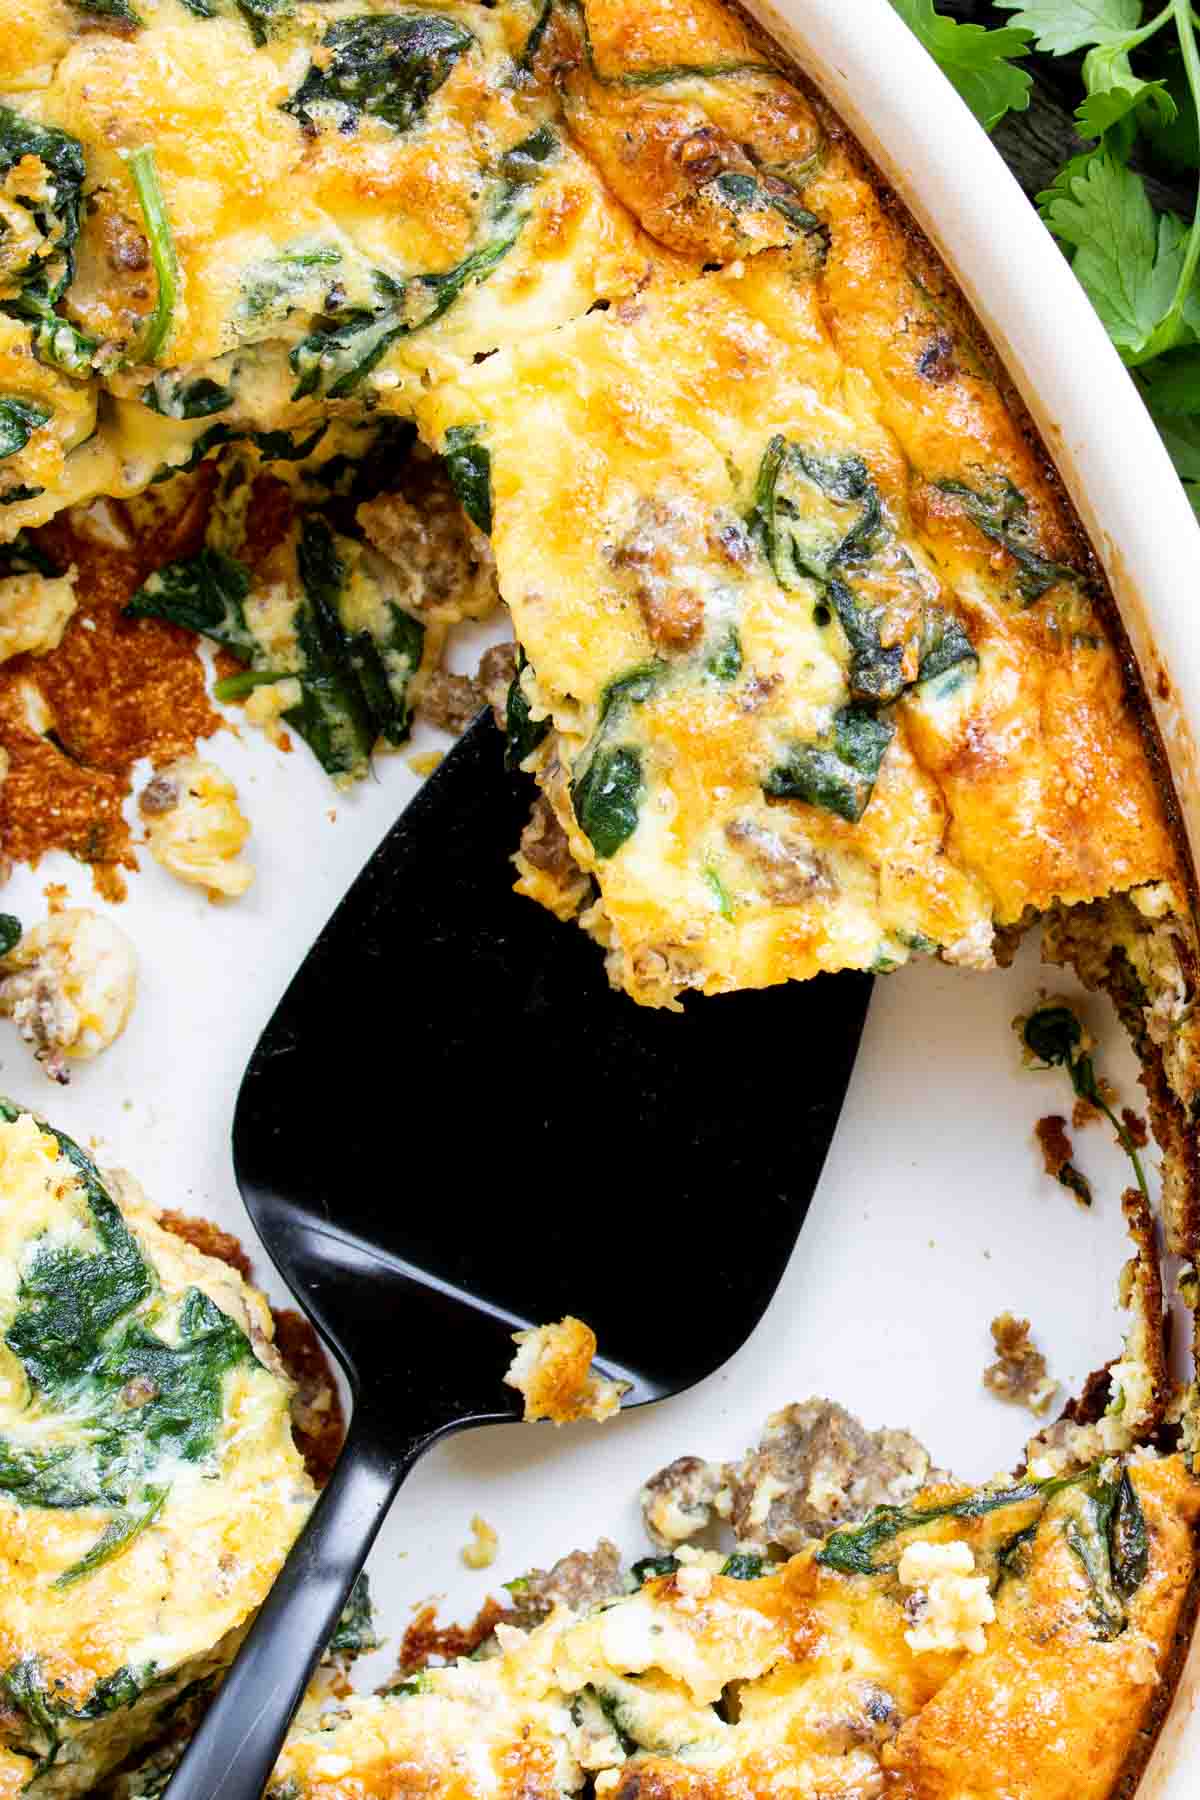 A freshly baked Spinach and Sausage Quiche with a slice being served.